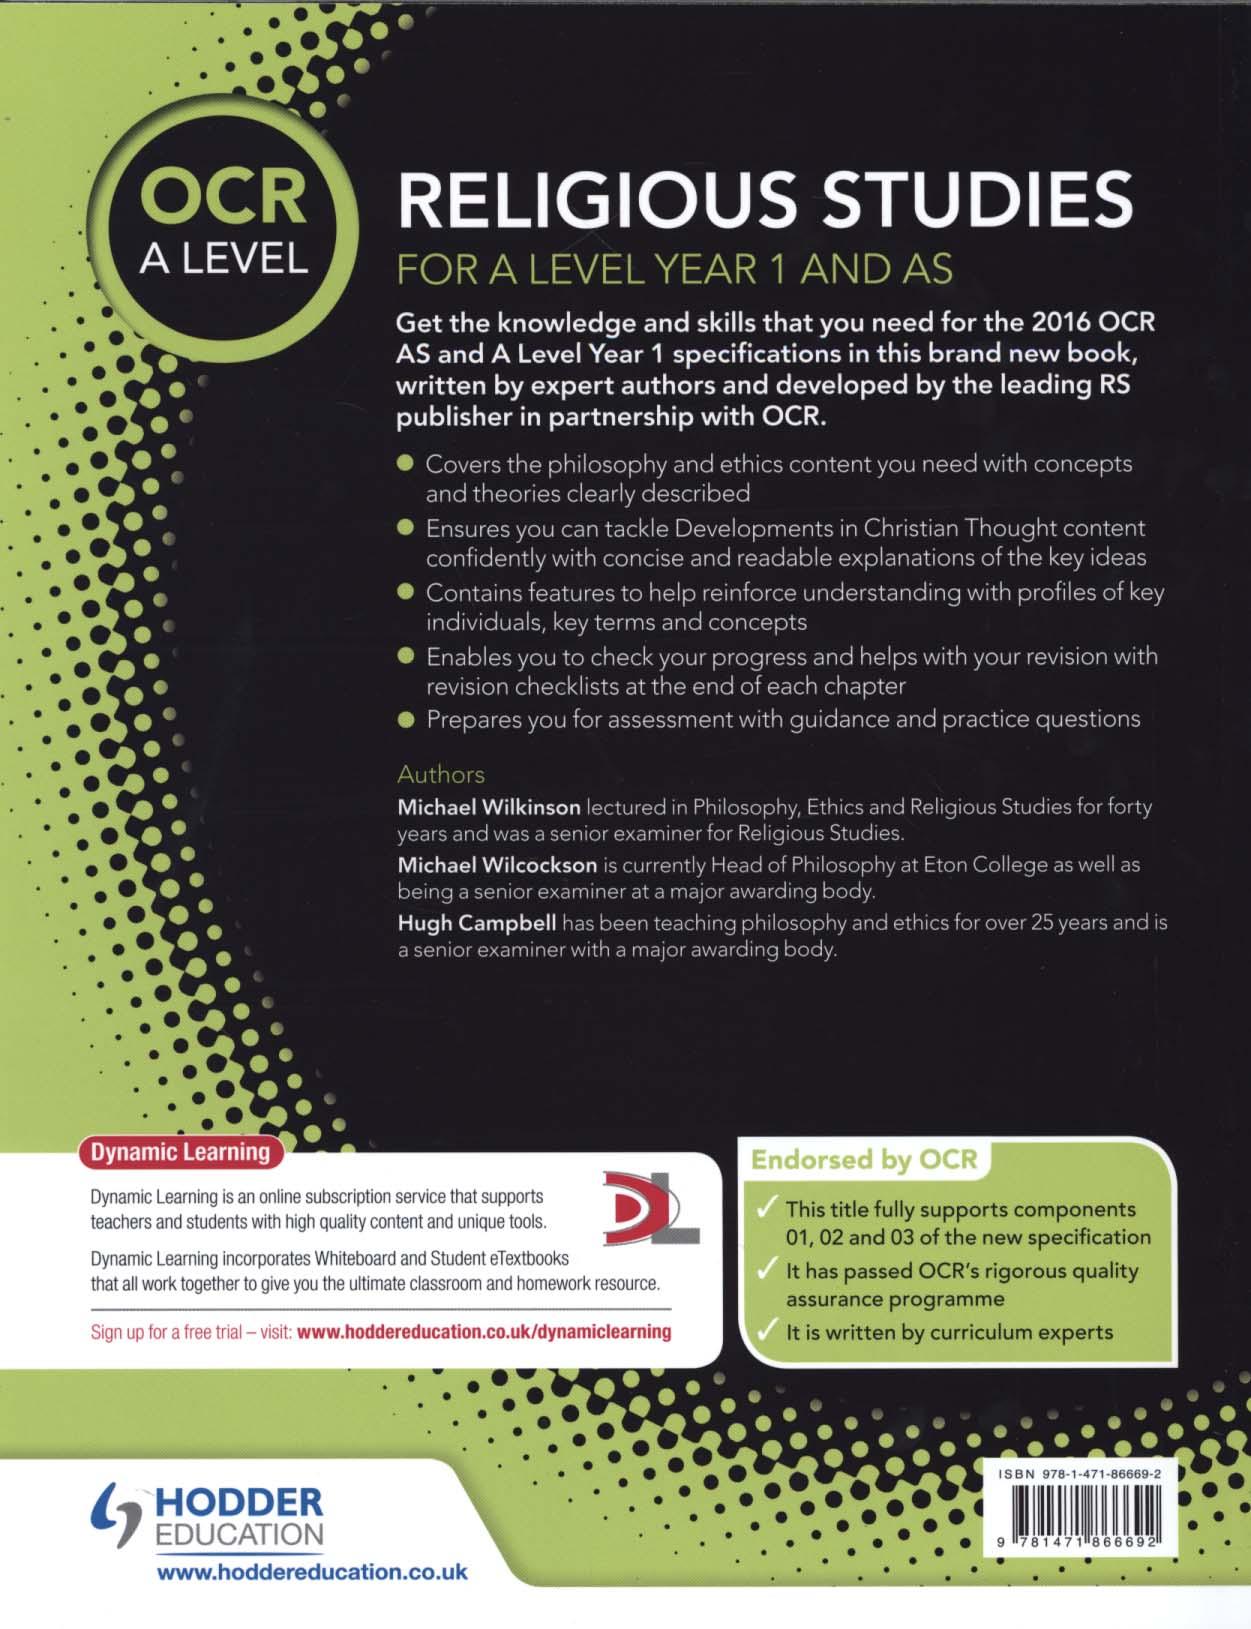 OCR Religious Studies a Level Year 1 and AS